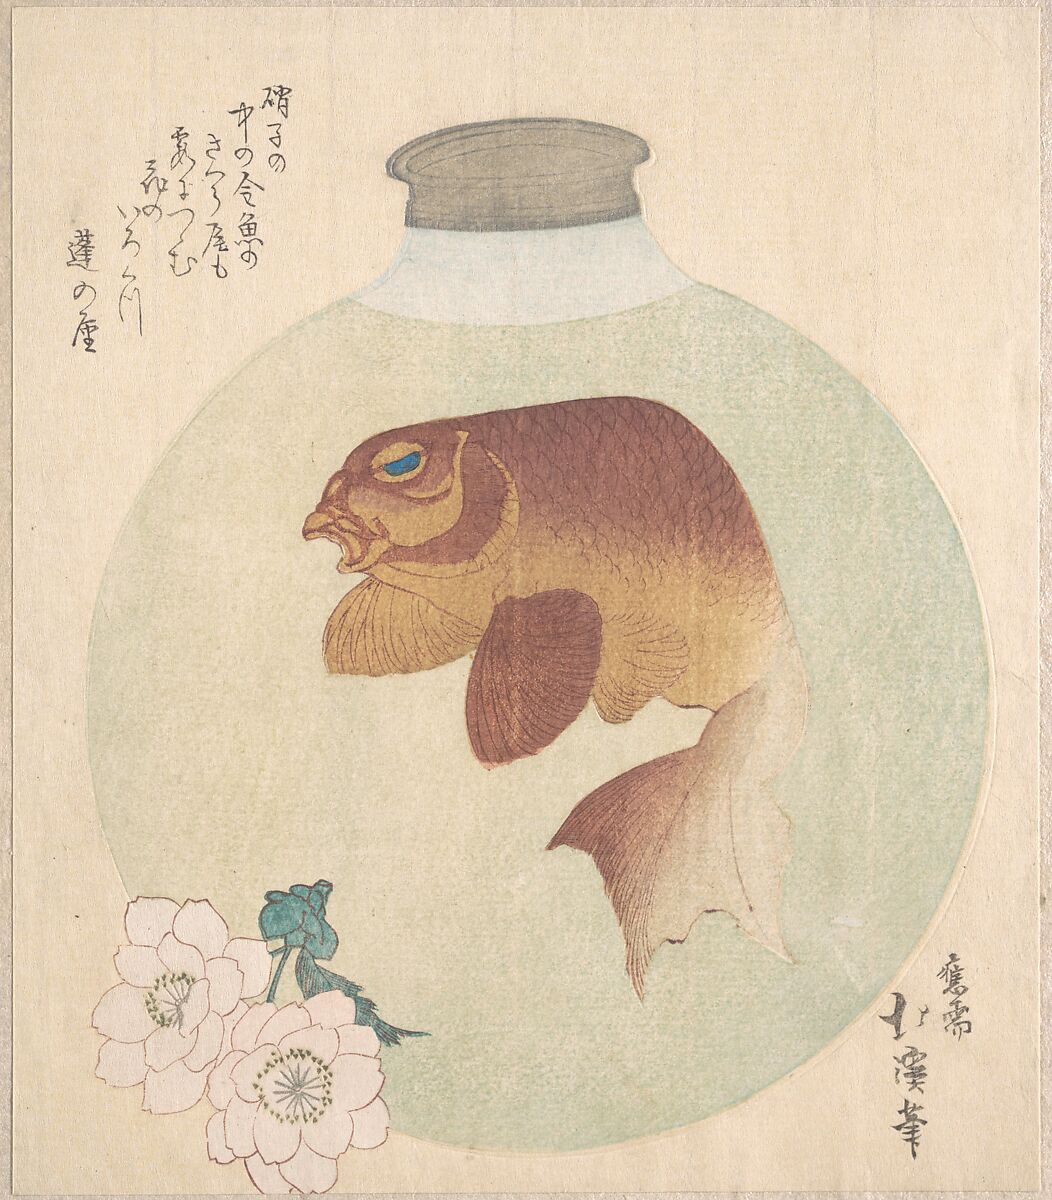 Gold-Fish in a Glass Bottle, Totoya Hokkei (Japanese, 1780–1850), Woodblock print (surimono); ink and color on paper, Japan 